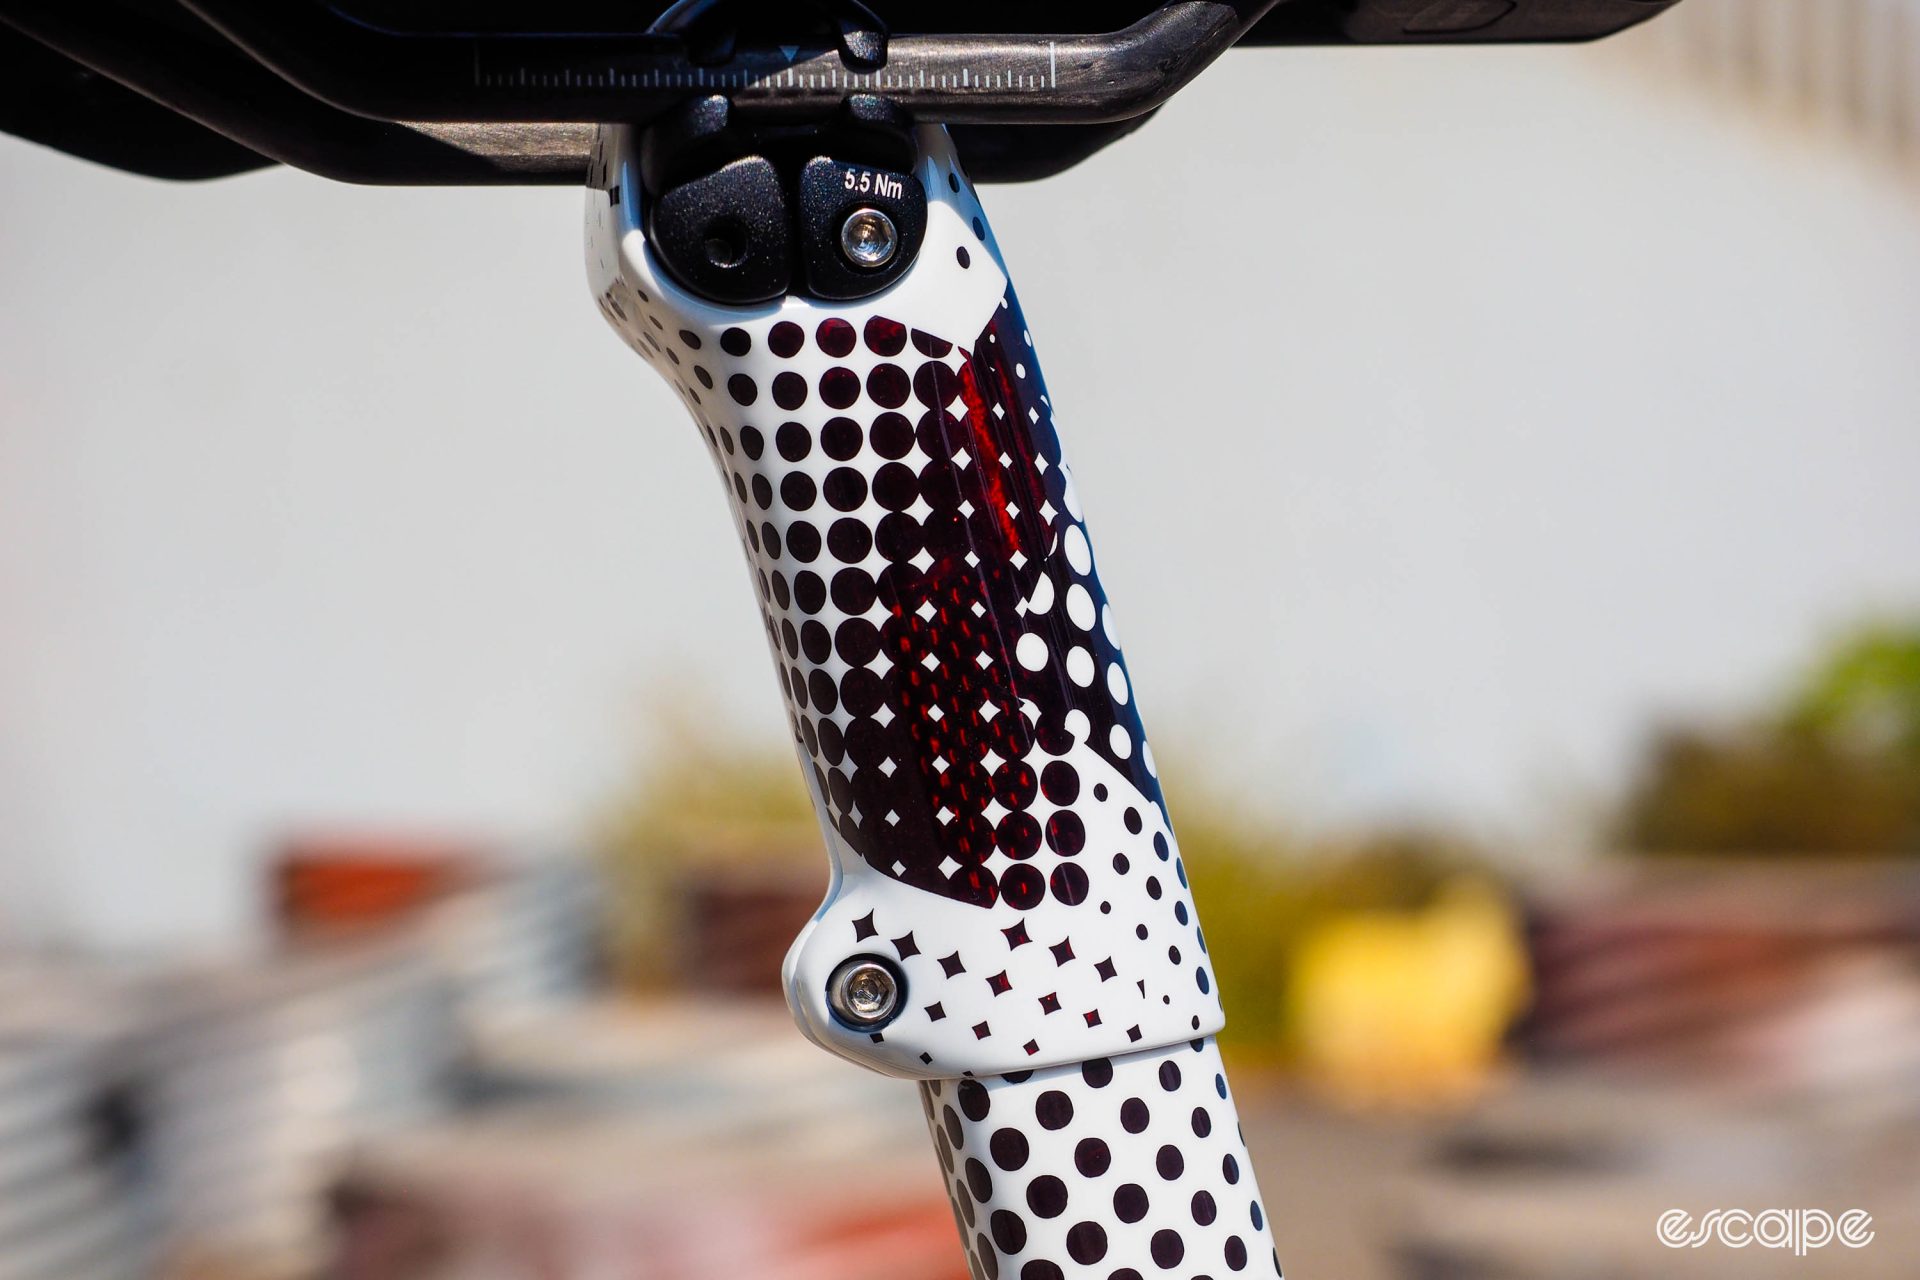 Detail shot of seatpost mast area on black and white 'digital camo' style paintjob on an Enve Custom All Road frame, showing a deep red clearcoat between the black and white pattern. 